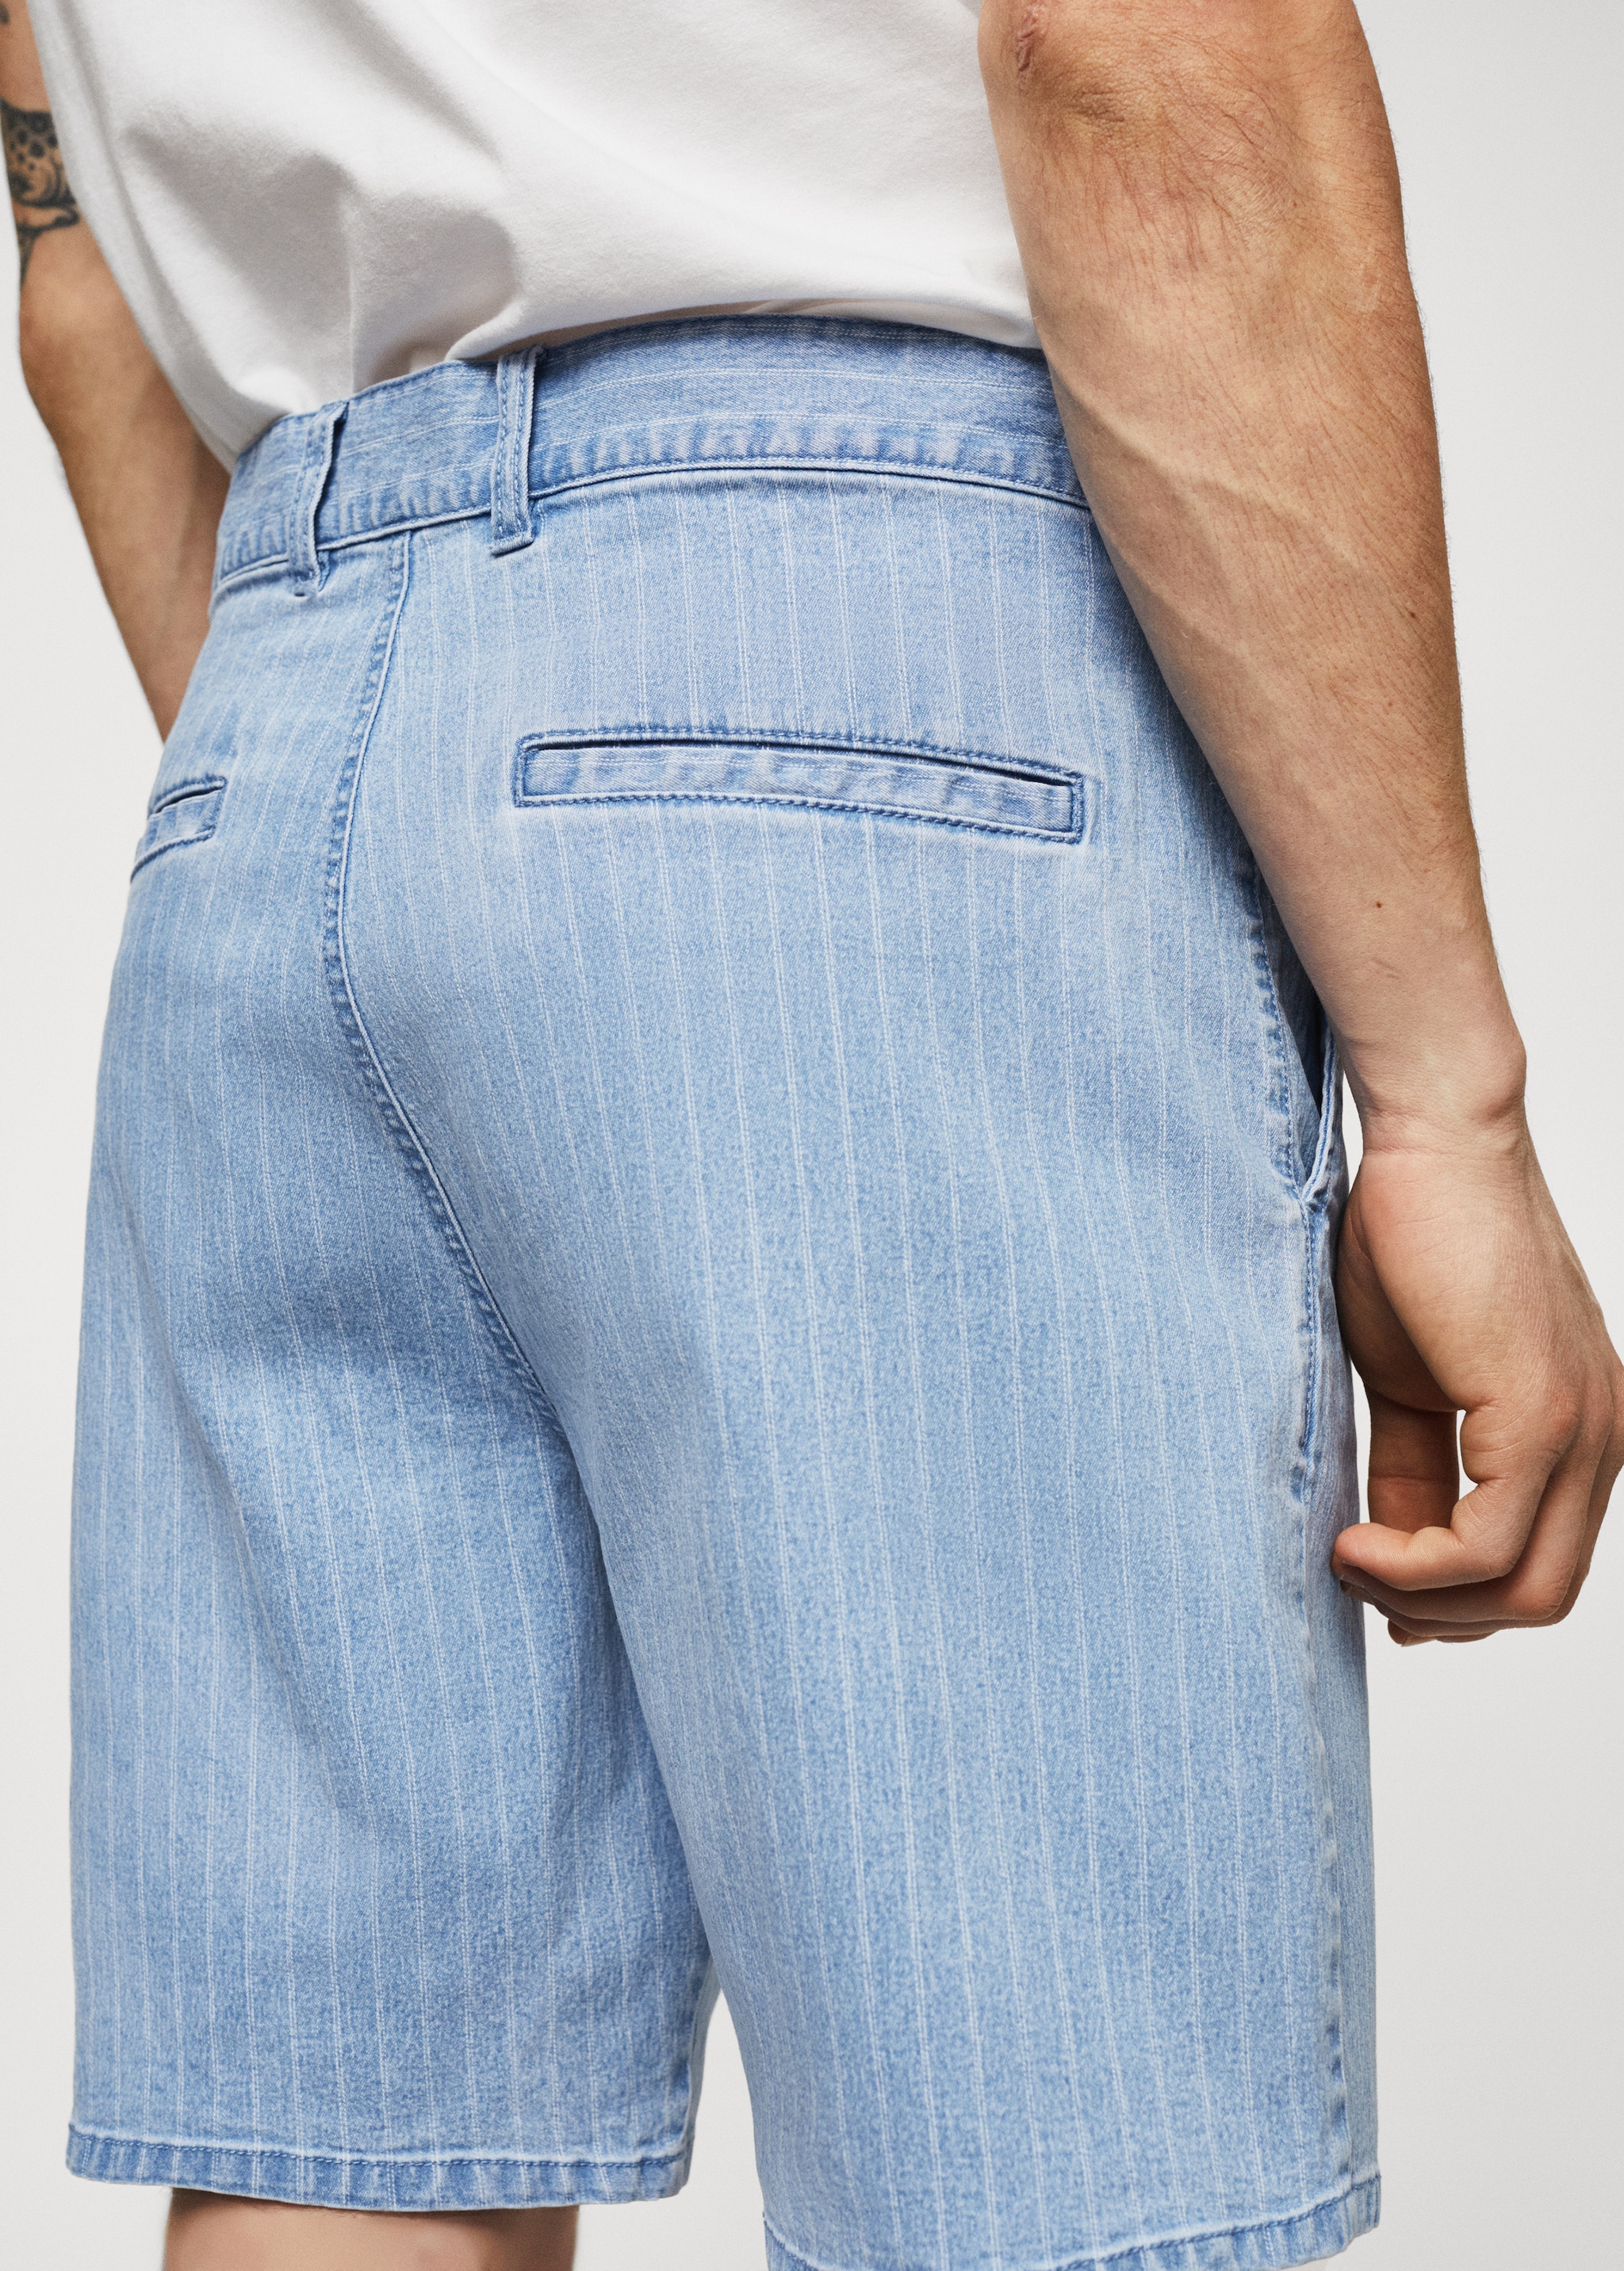 Striped denim shorts - Details of the article 6